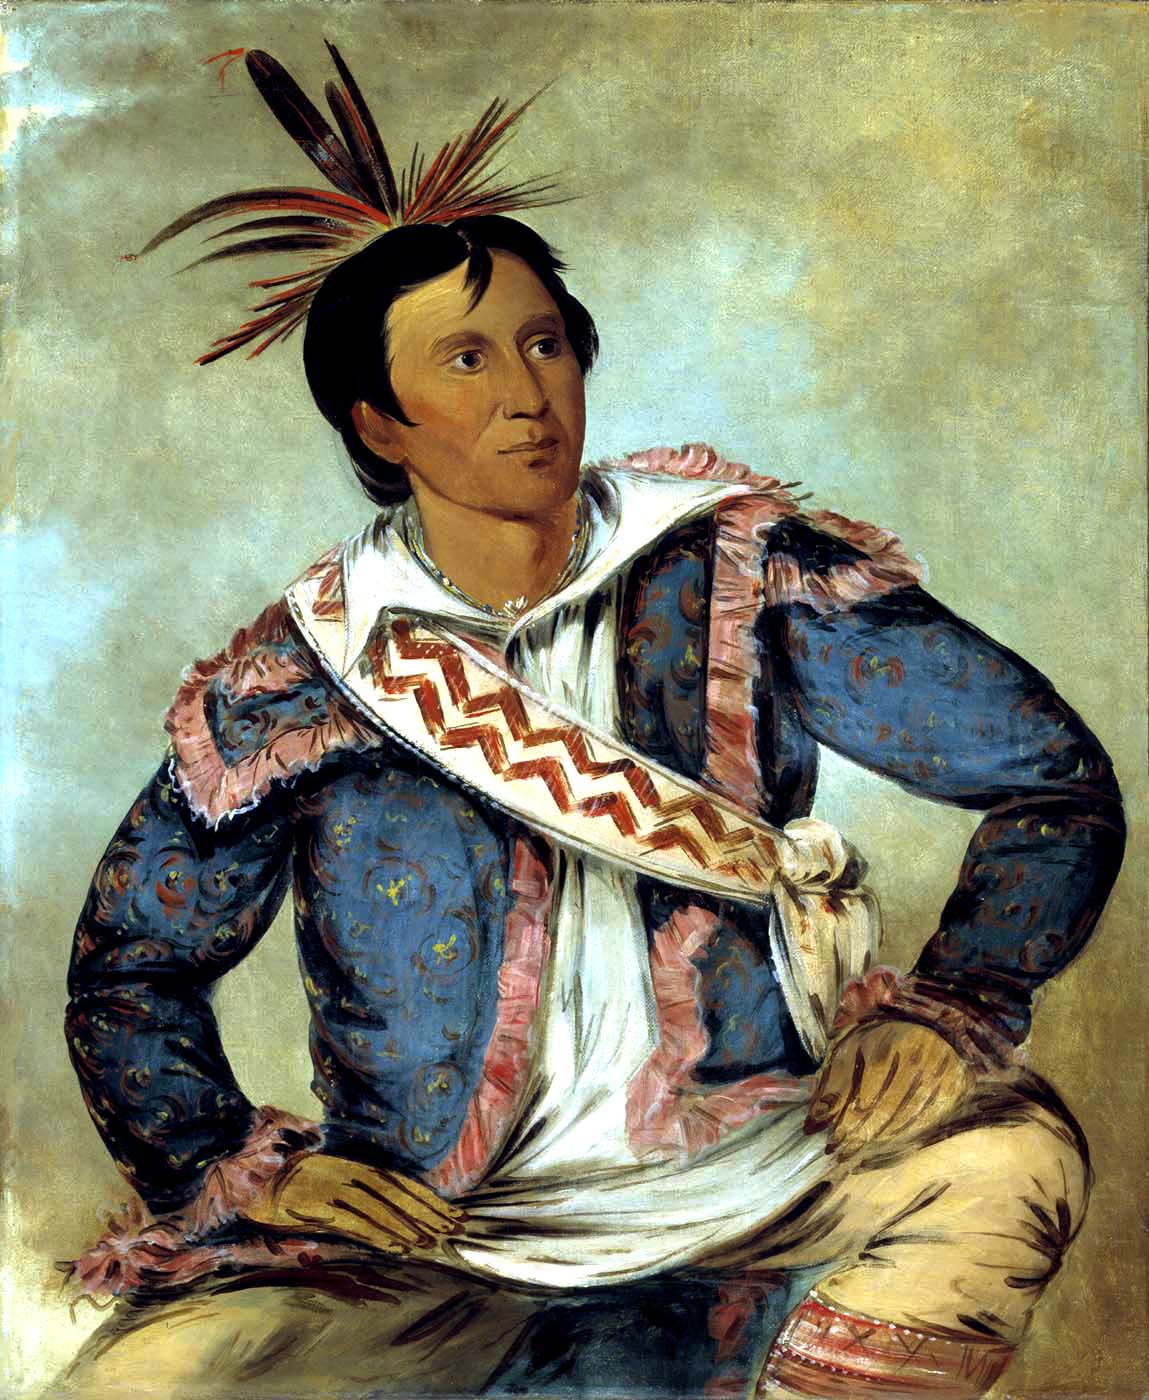 Peter Perkins Pitchlynn was the Choctaw Principal Chief from 1864-1866